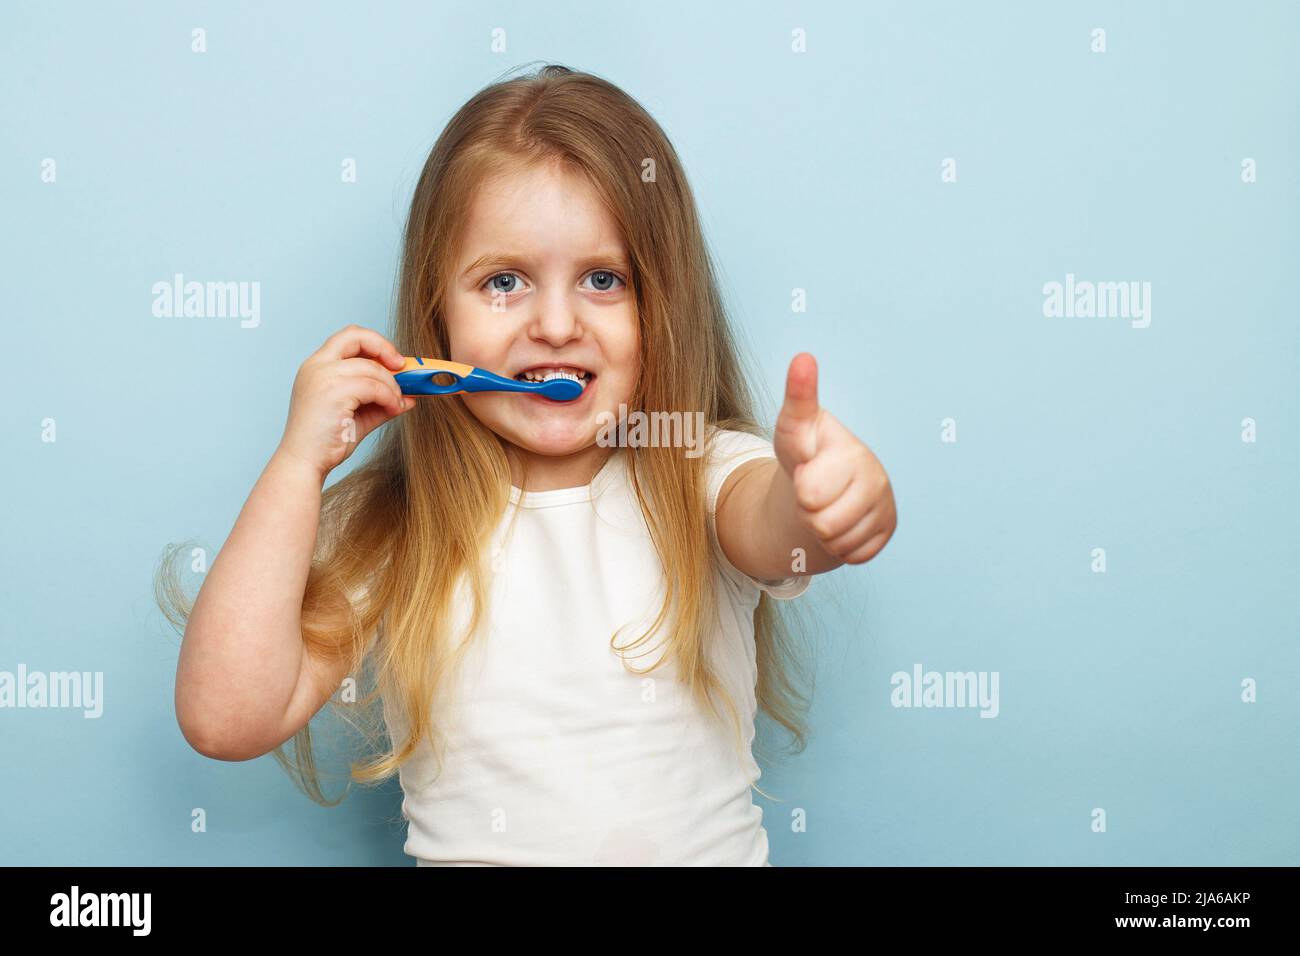 little happy girl brushing her teeth with a toothbrush and smiling on a blue background. thumb up Stock Photo